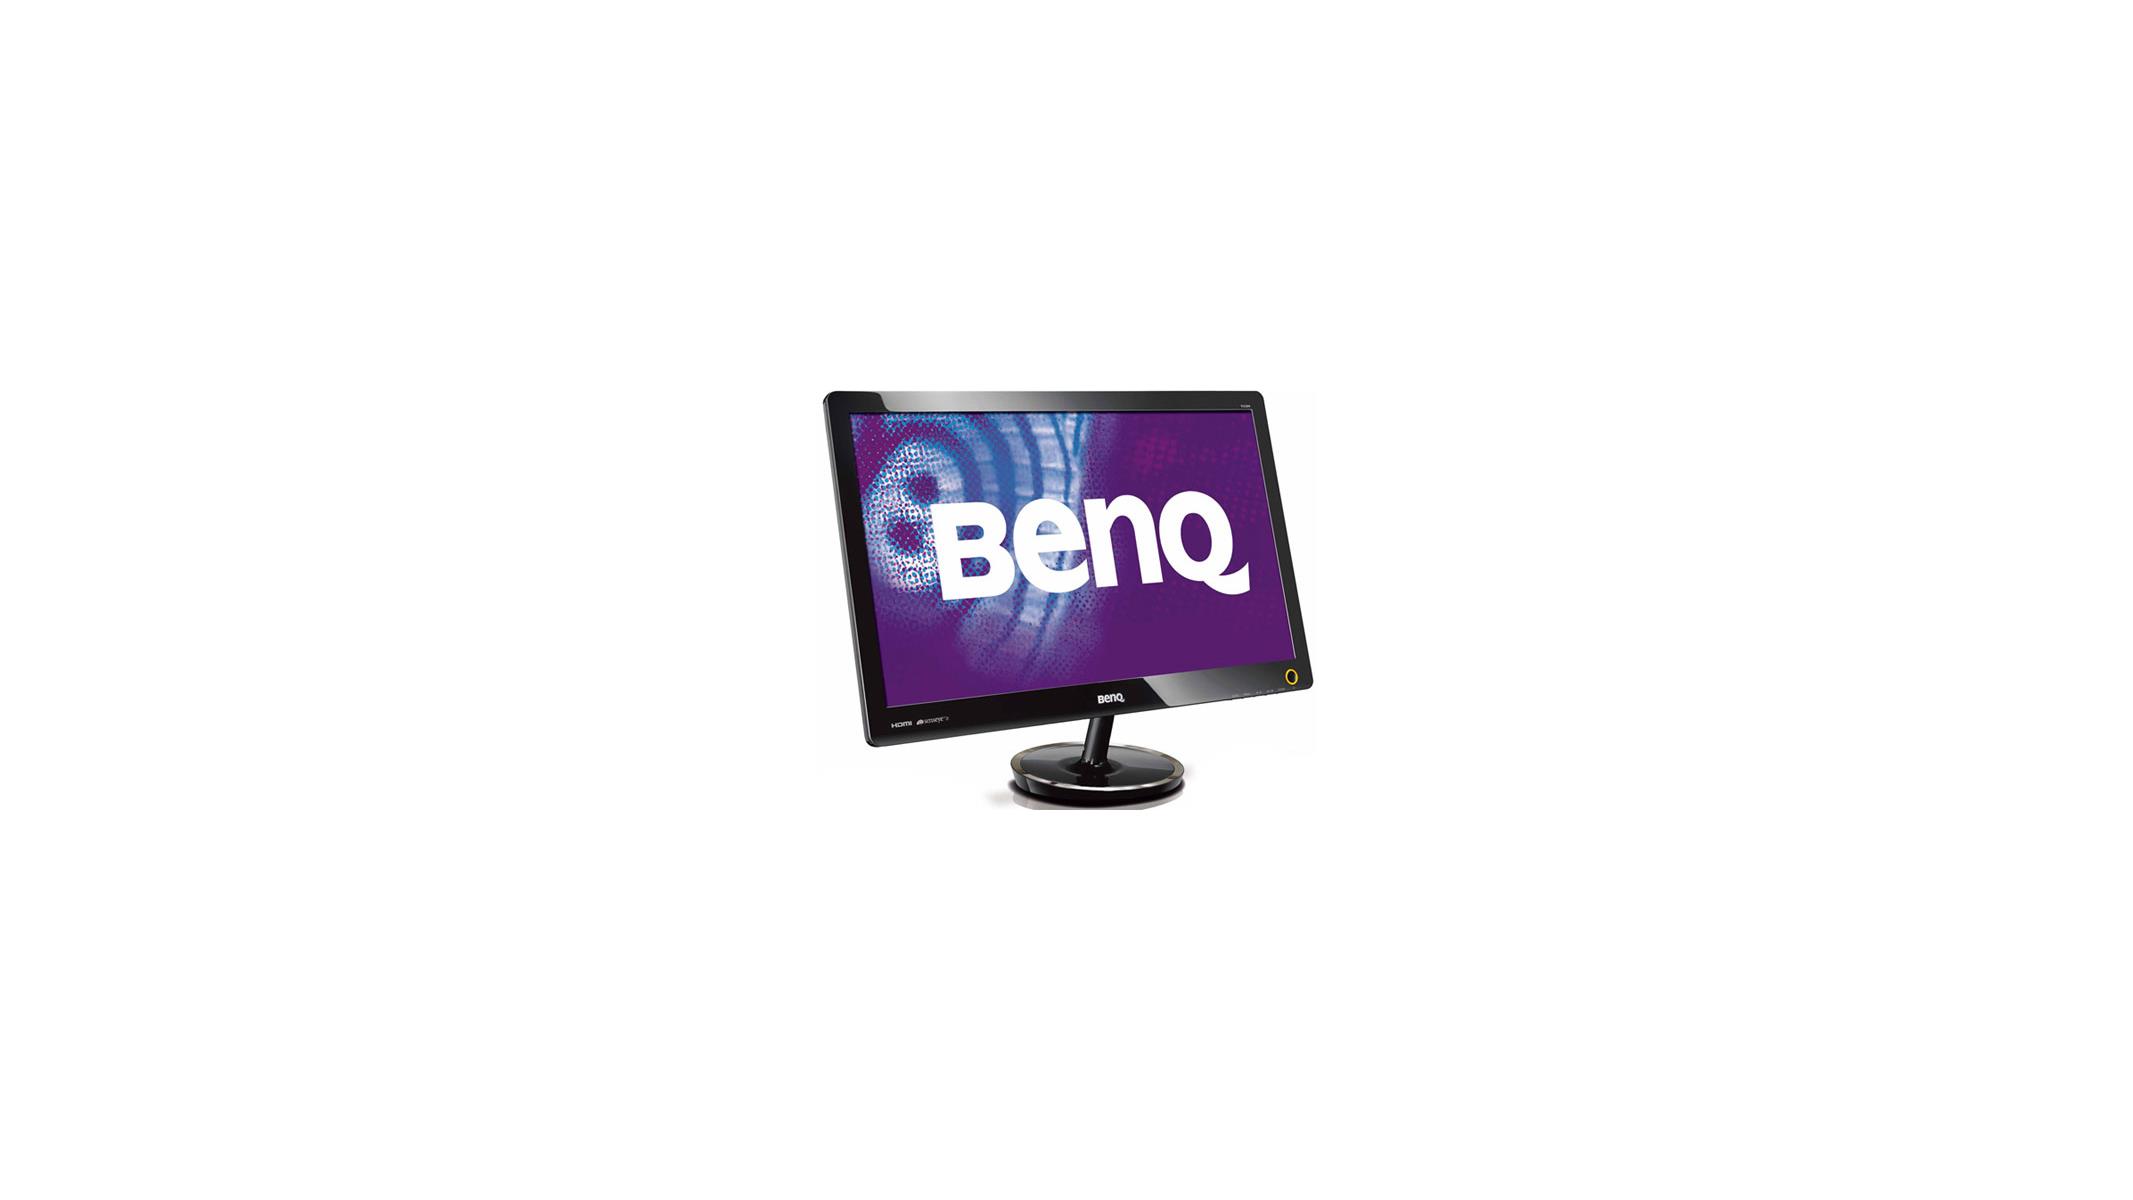 BenQ Announces 12 New V Series LCD Monitors: Sleek And Sexy